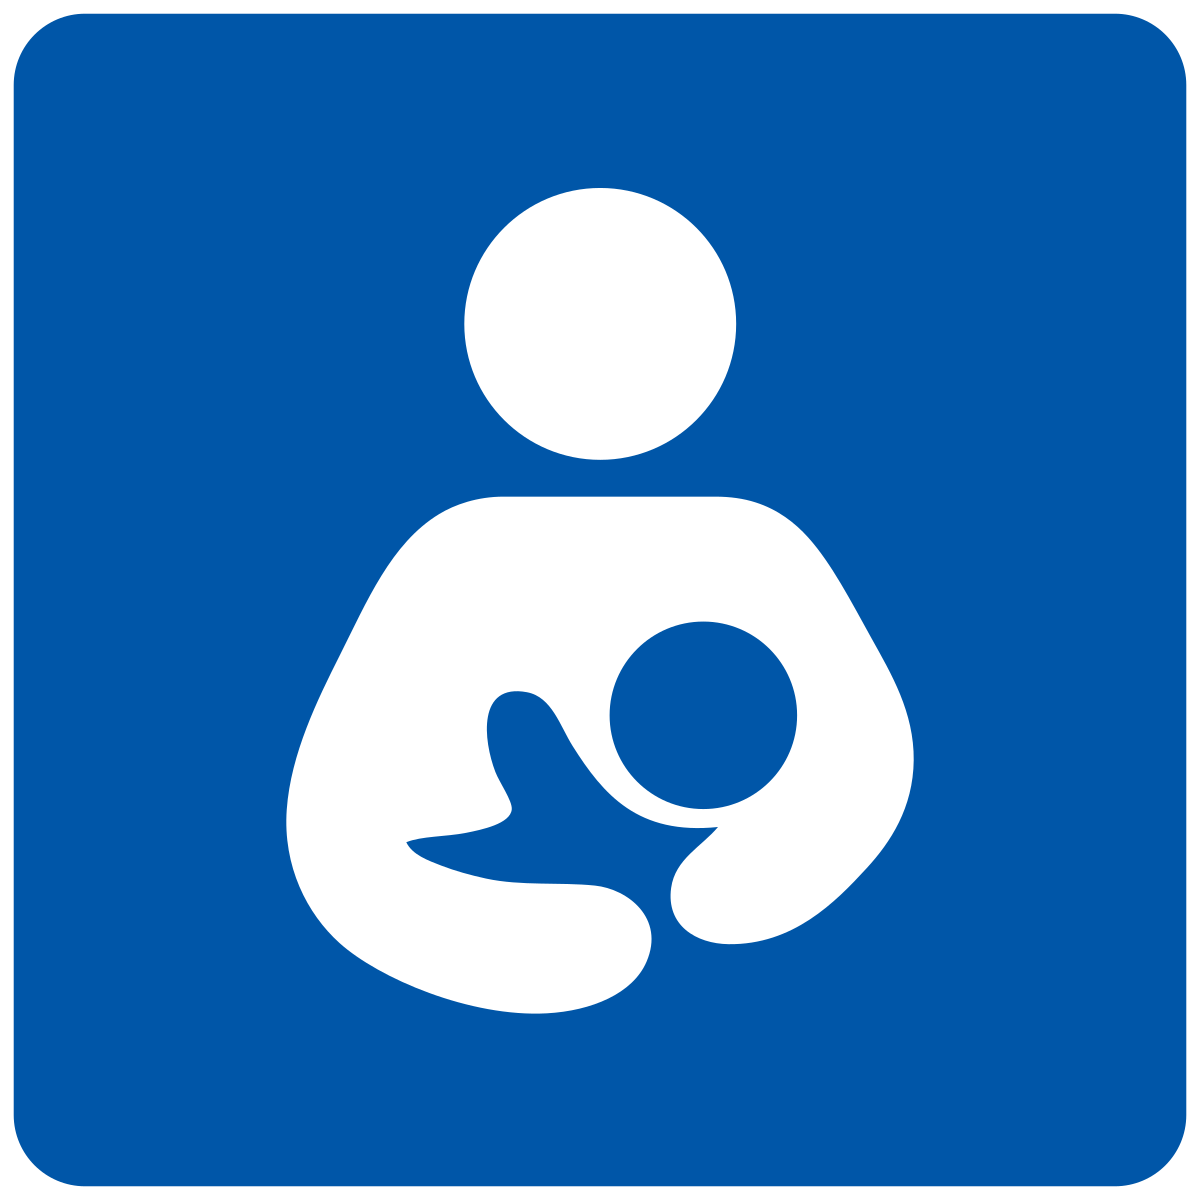 https://upload.wikimedia.org/wikipedia/commons/thumb/6/6f/Breastfeeding-icon-med.svg/1200px-Breastfeeding-icon-med.svg.png